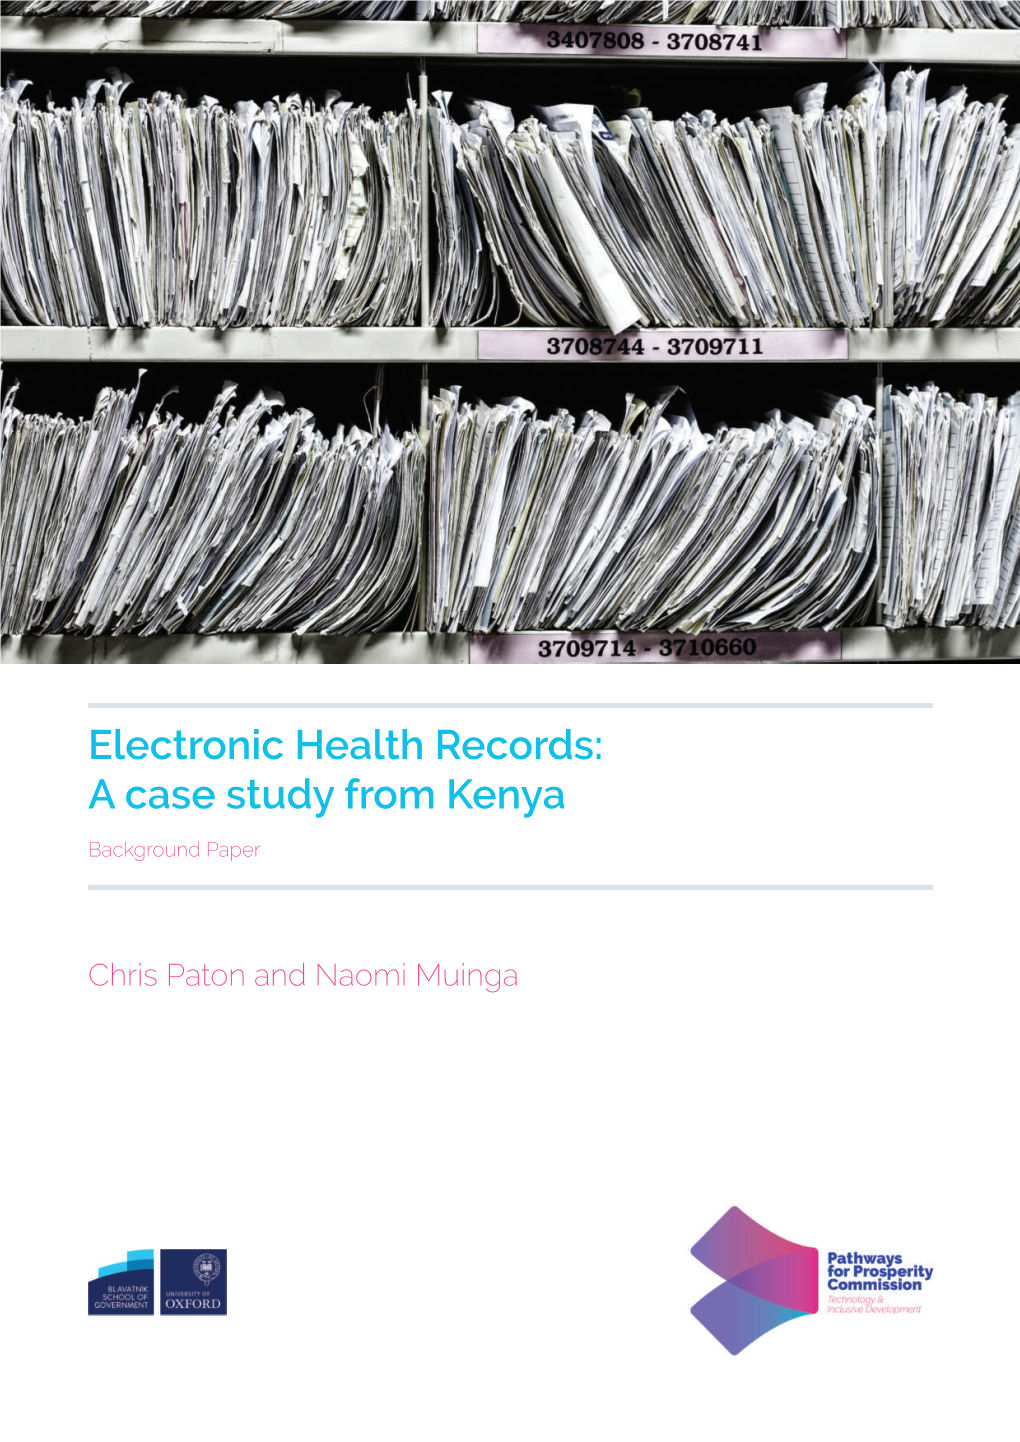 Electronic Health Records: a Case Study from Kenya